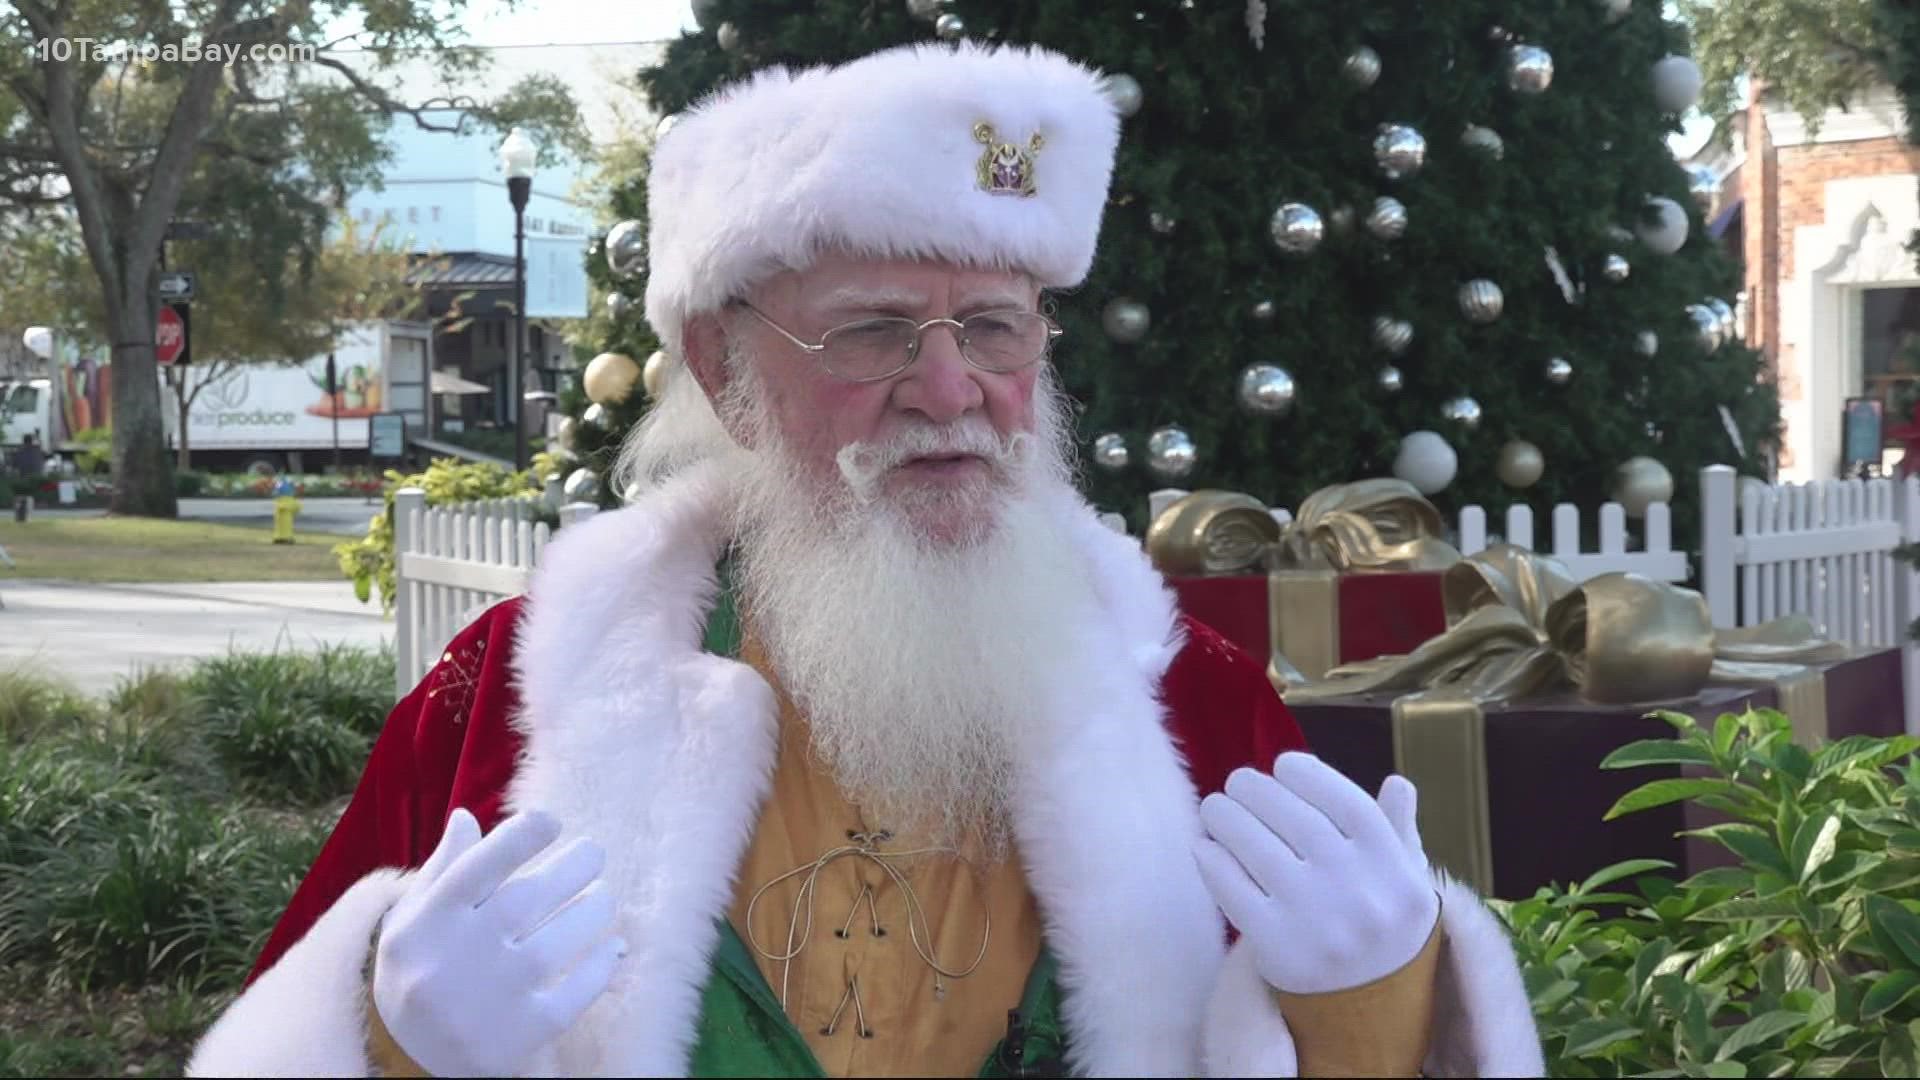 Bob Elkin is the only Santa Claus in the Tampa Bay area to have a doctorate in Santa Clausology from the International University of Santa Claus.